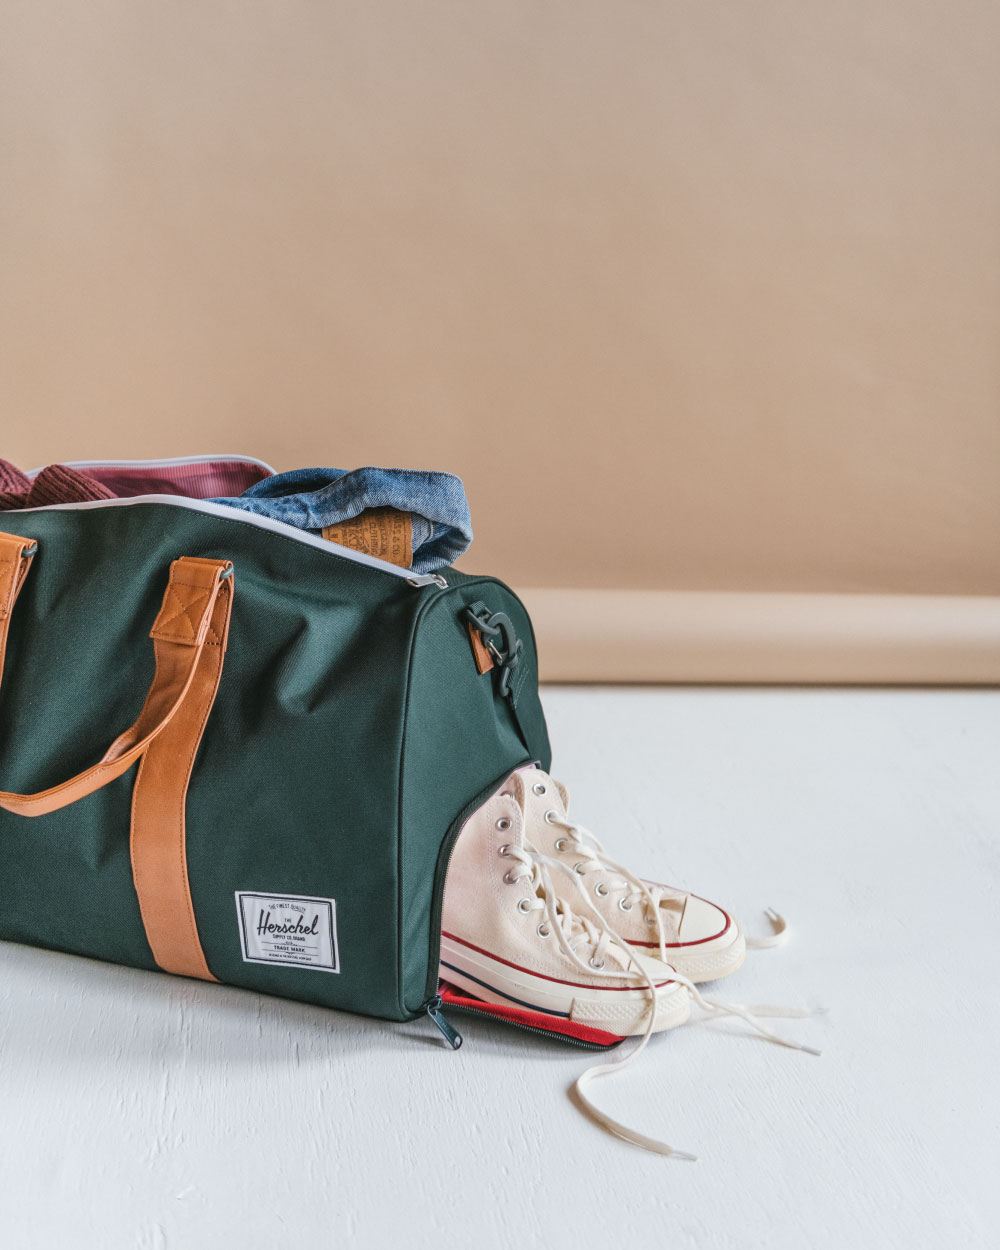 A Herschel Novel Duffle all packed up with some white sneakers hanging out the side-access shoe compartment